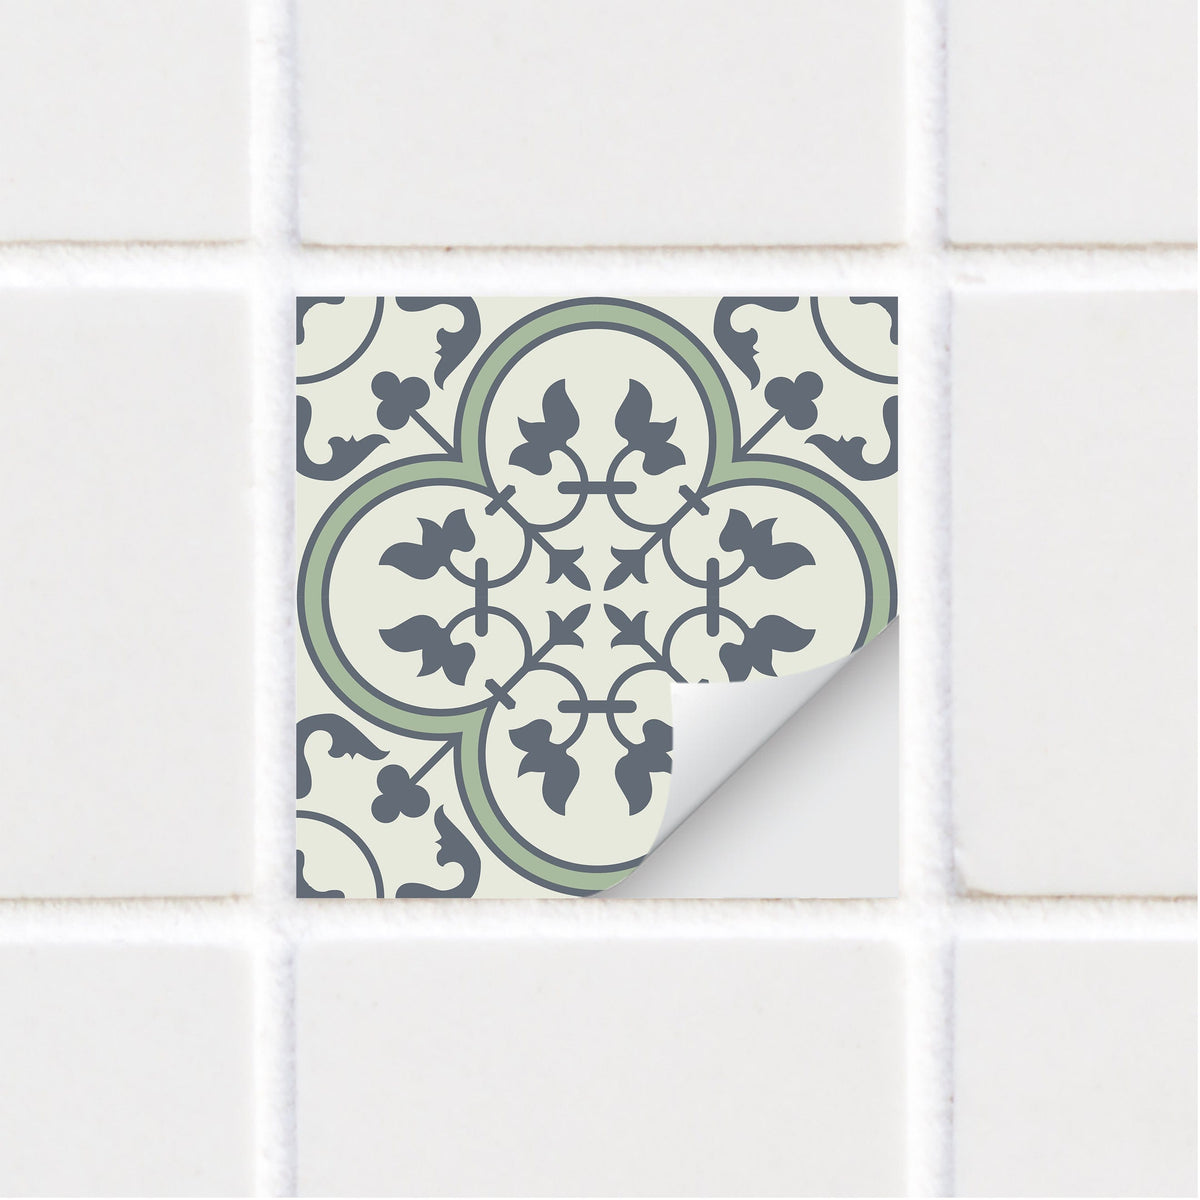 Hobson Tile Stickers Price, Buy Tile Sticker